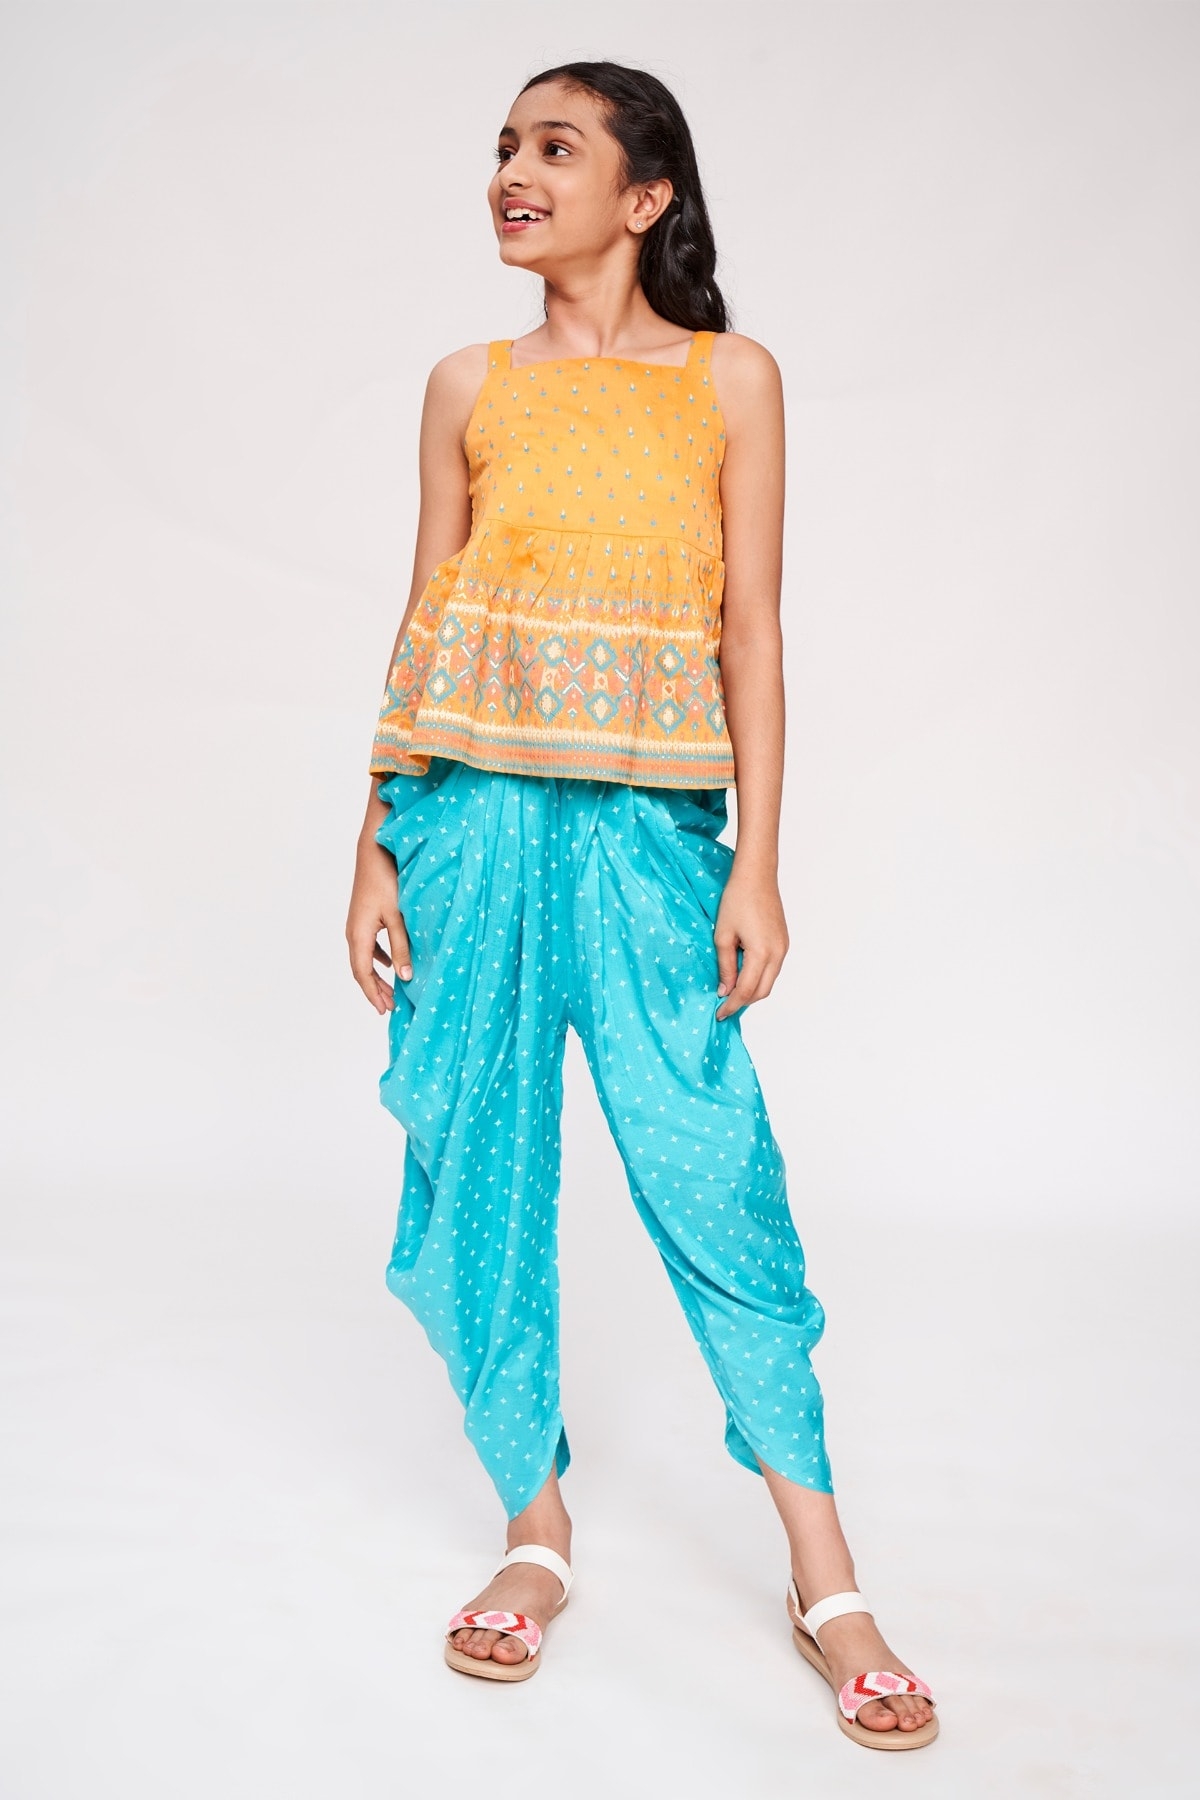 Orange And Blue Ethnic Motifs Printed Fit And Flare Suit